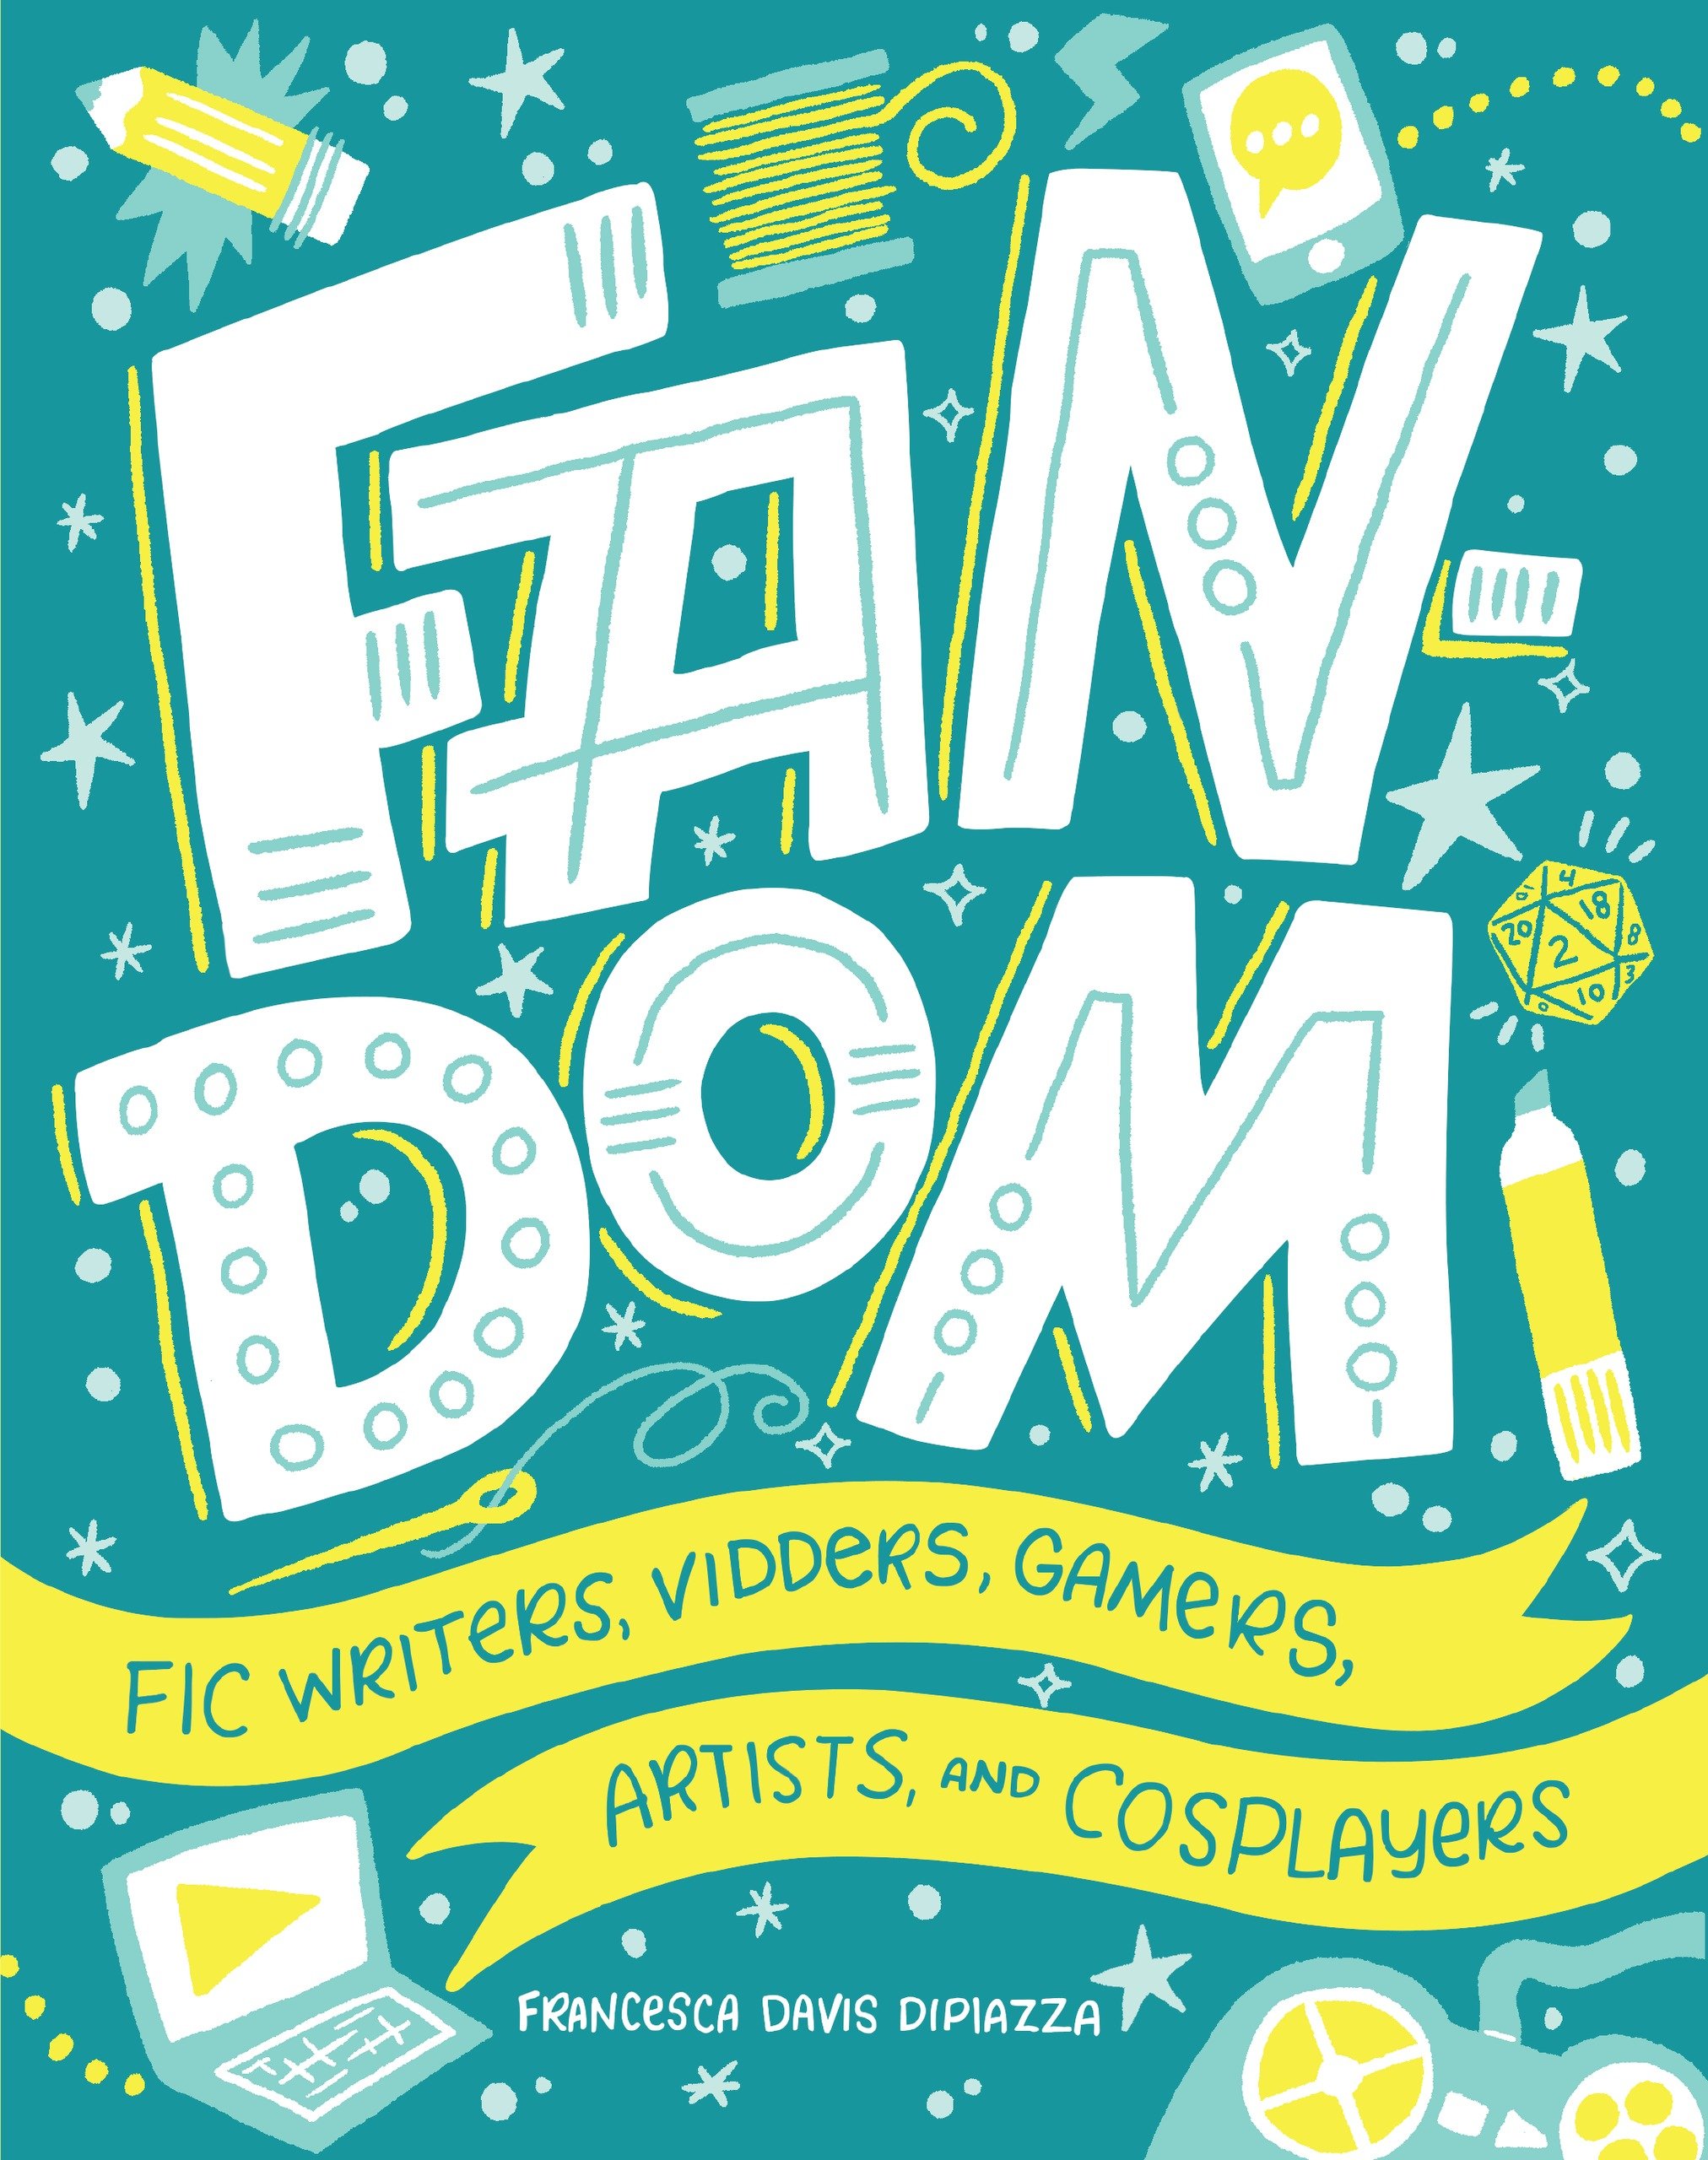 Fandom: fic writers, vidders, gamers, artists, and cosplayers.